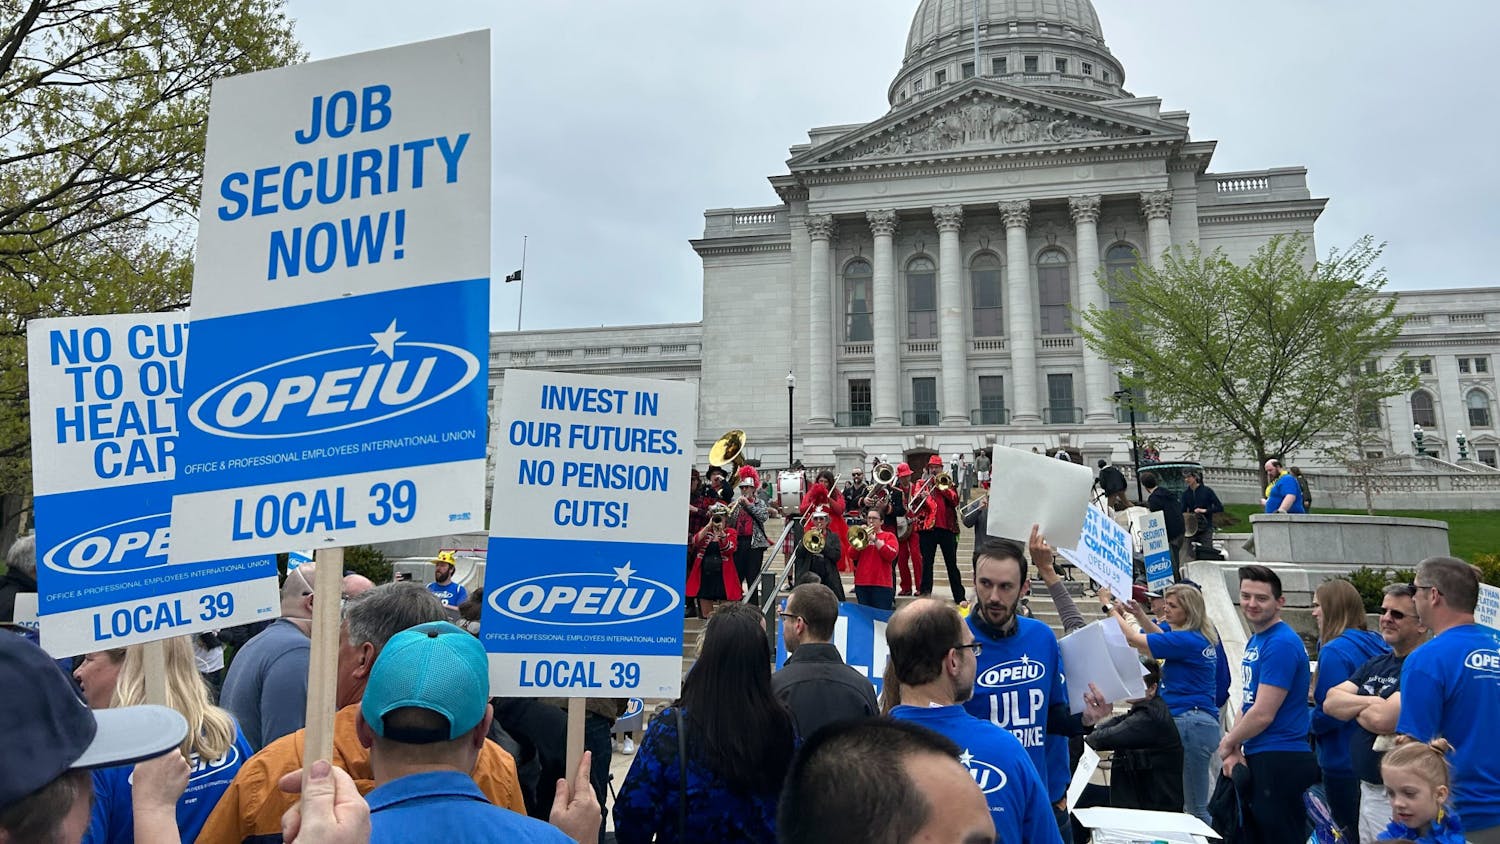 jobsecurityprotestmadisoncapitol.jpg